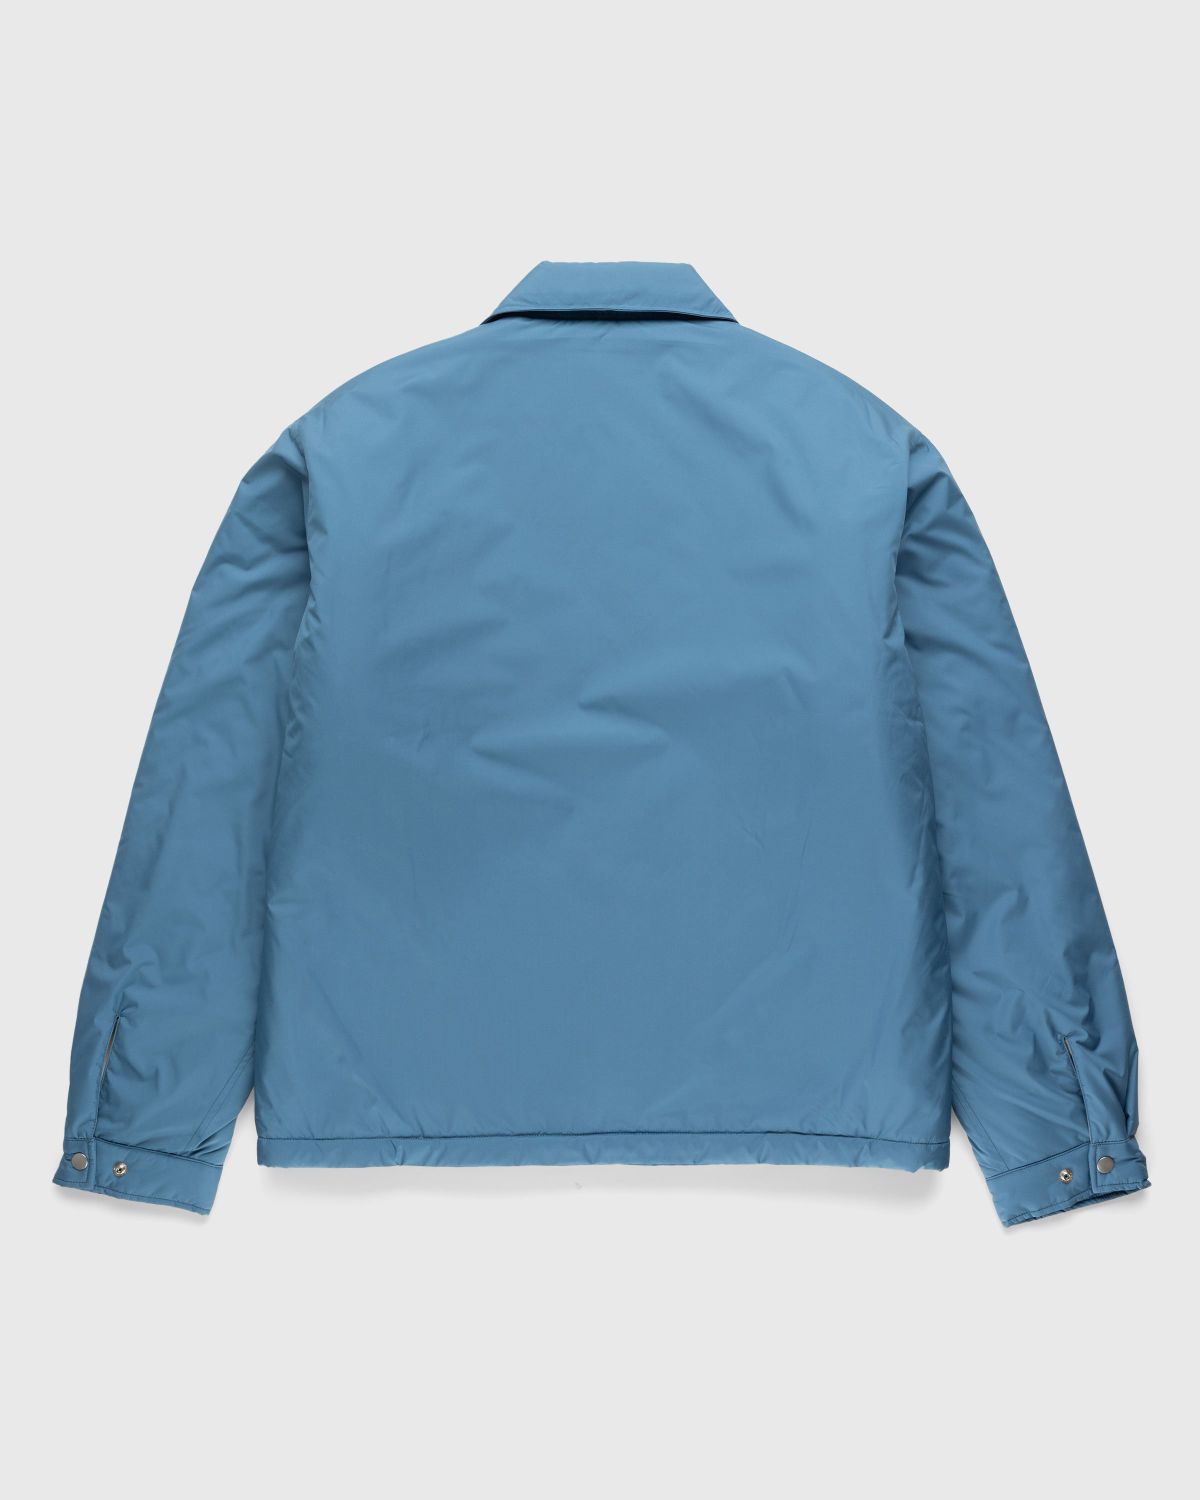 Highsnobiety HS05 – Light Insulated Eco-Poly Jacket Blue - Outerwear - Blue - Image 2